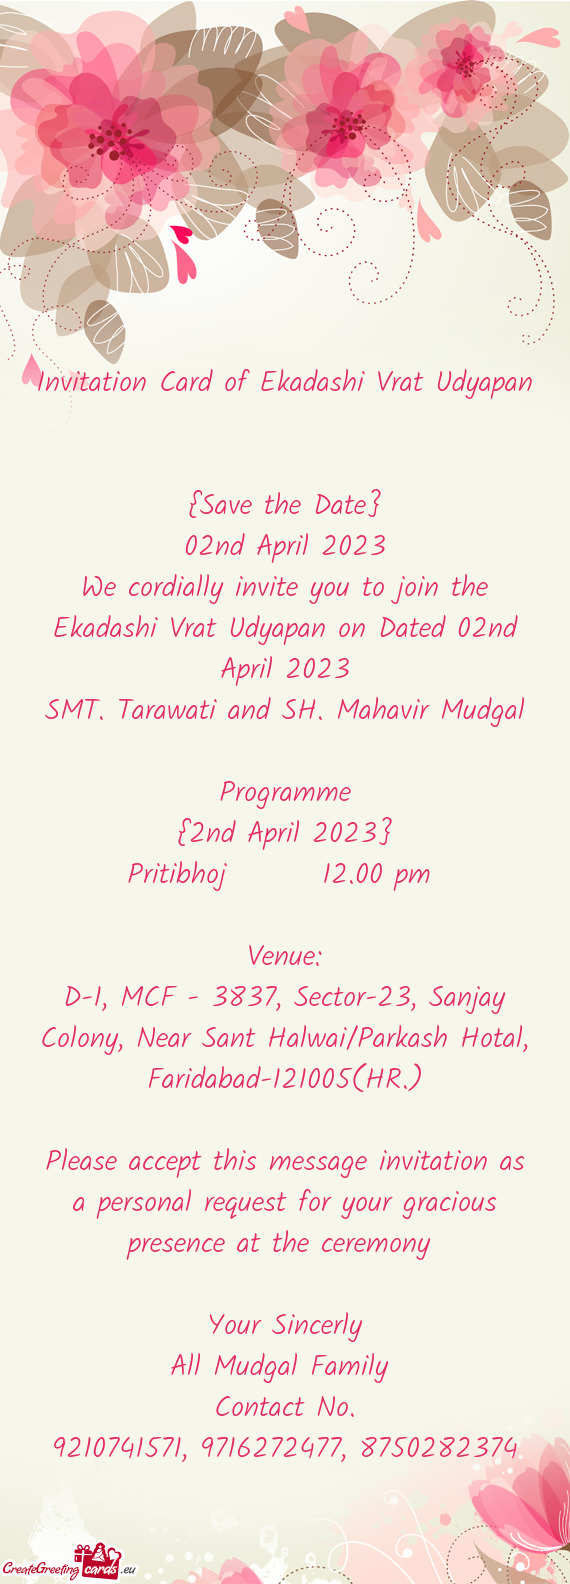 We cordially invite you to join the Ekadashi Vrat Udyapan on Dated 02nd April 2023